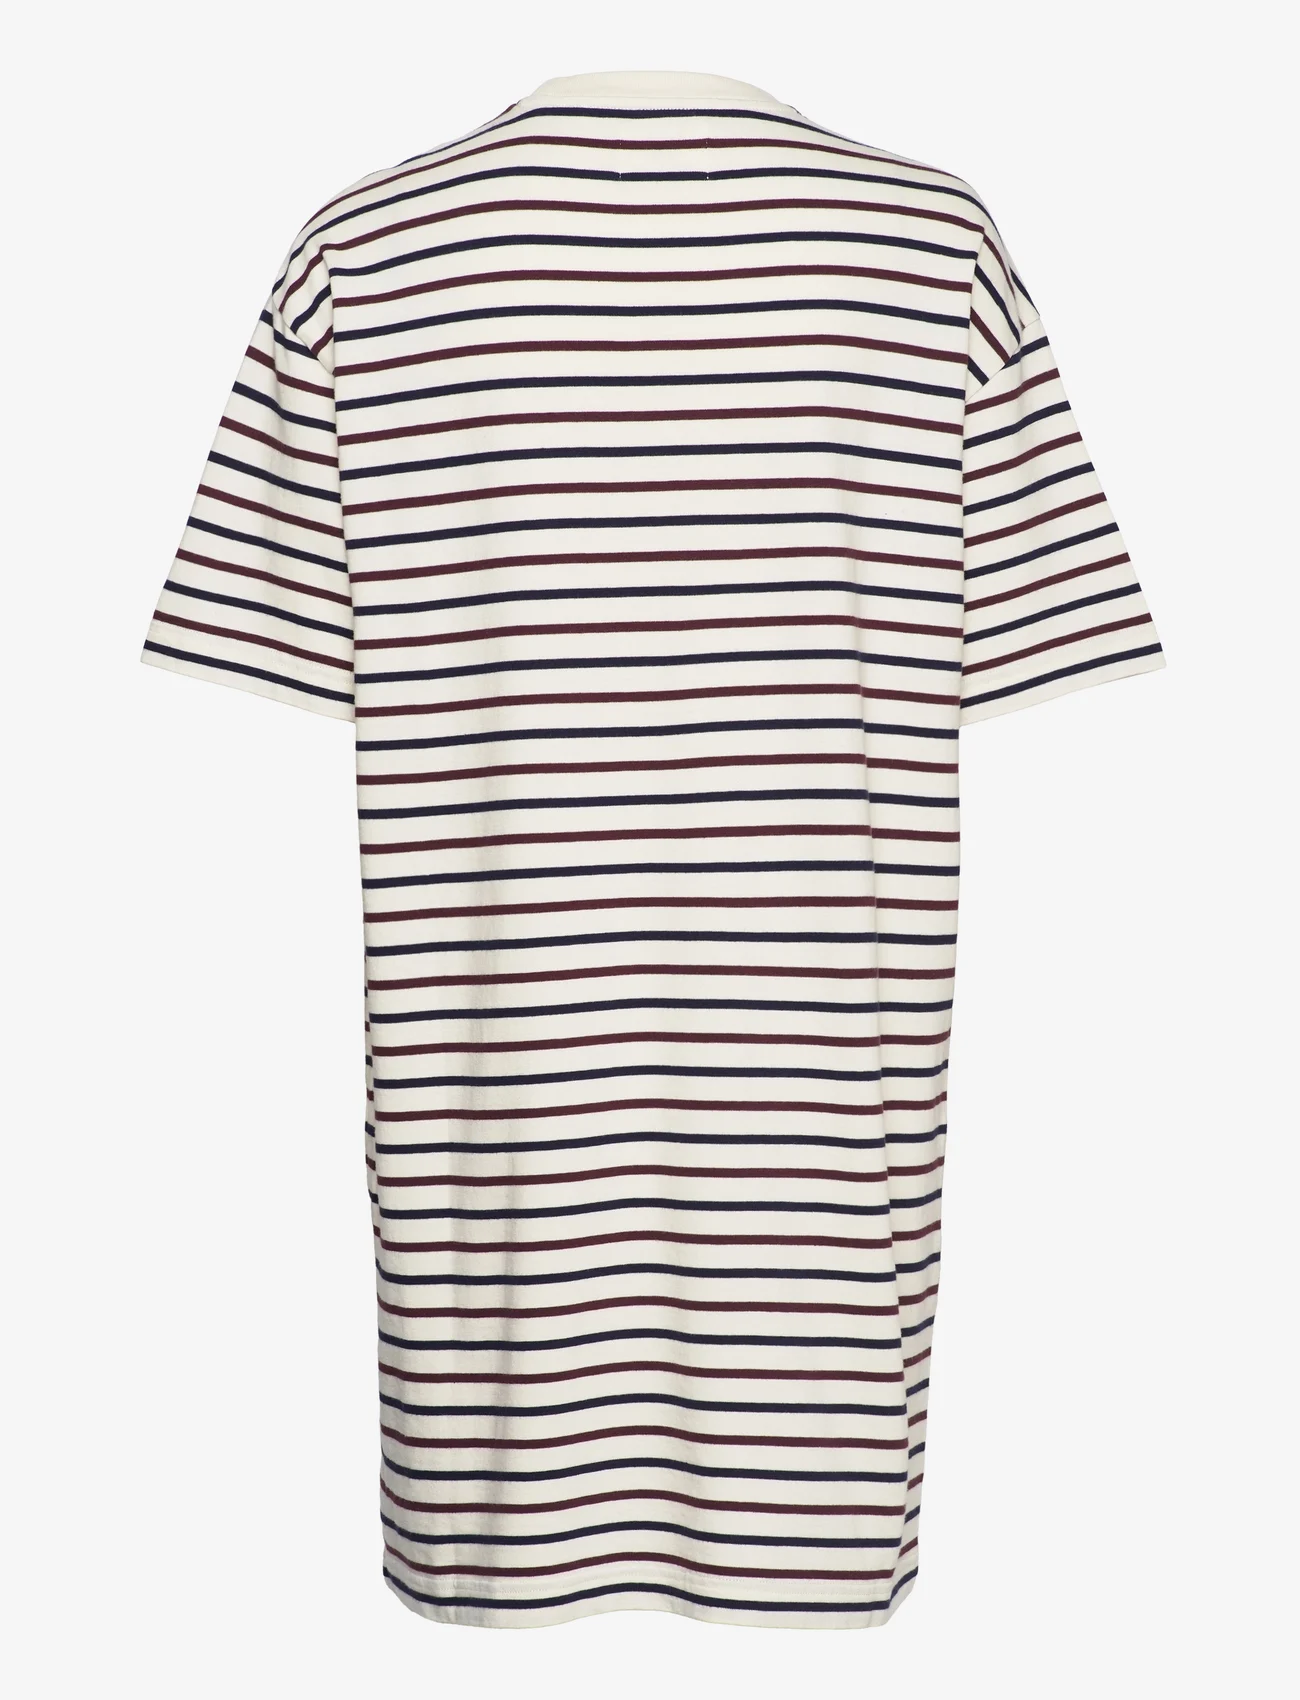 Double A by Wood Wood - Ulla stripe dress - t-shirt-kleider - off-white/burgundy stripes - 1